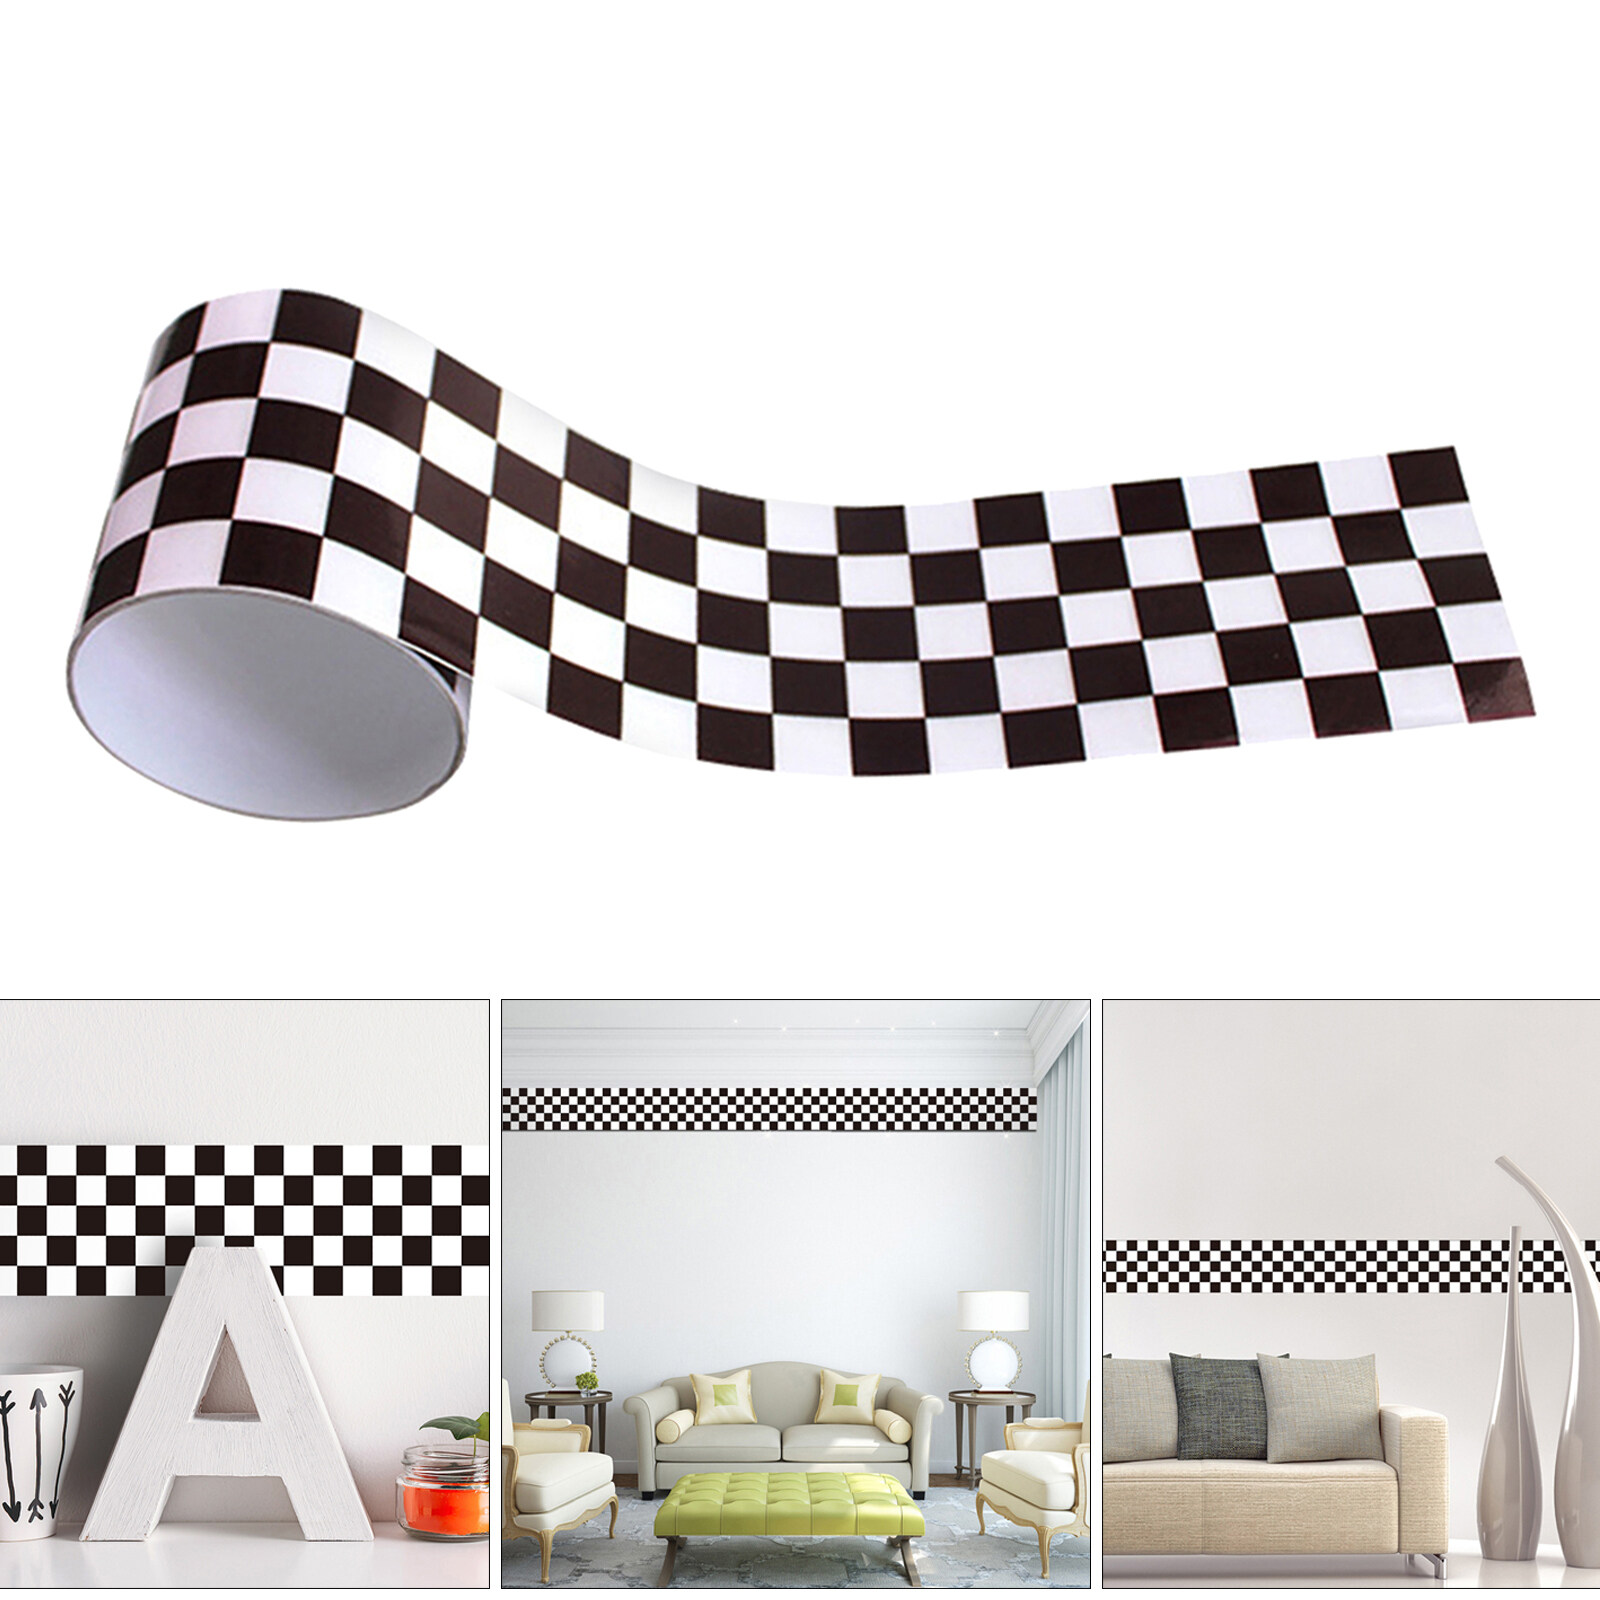 Dolity Black White Grid Mosaic Wall Decal Wall Sticker Living Room Bedroom  Wall Art